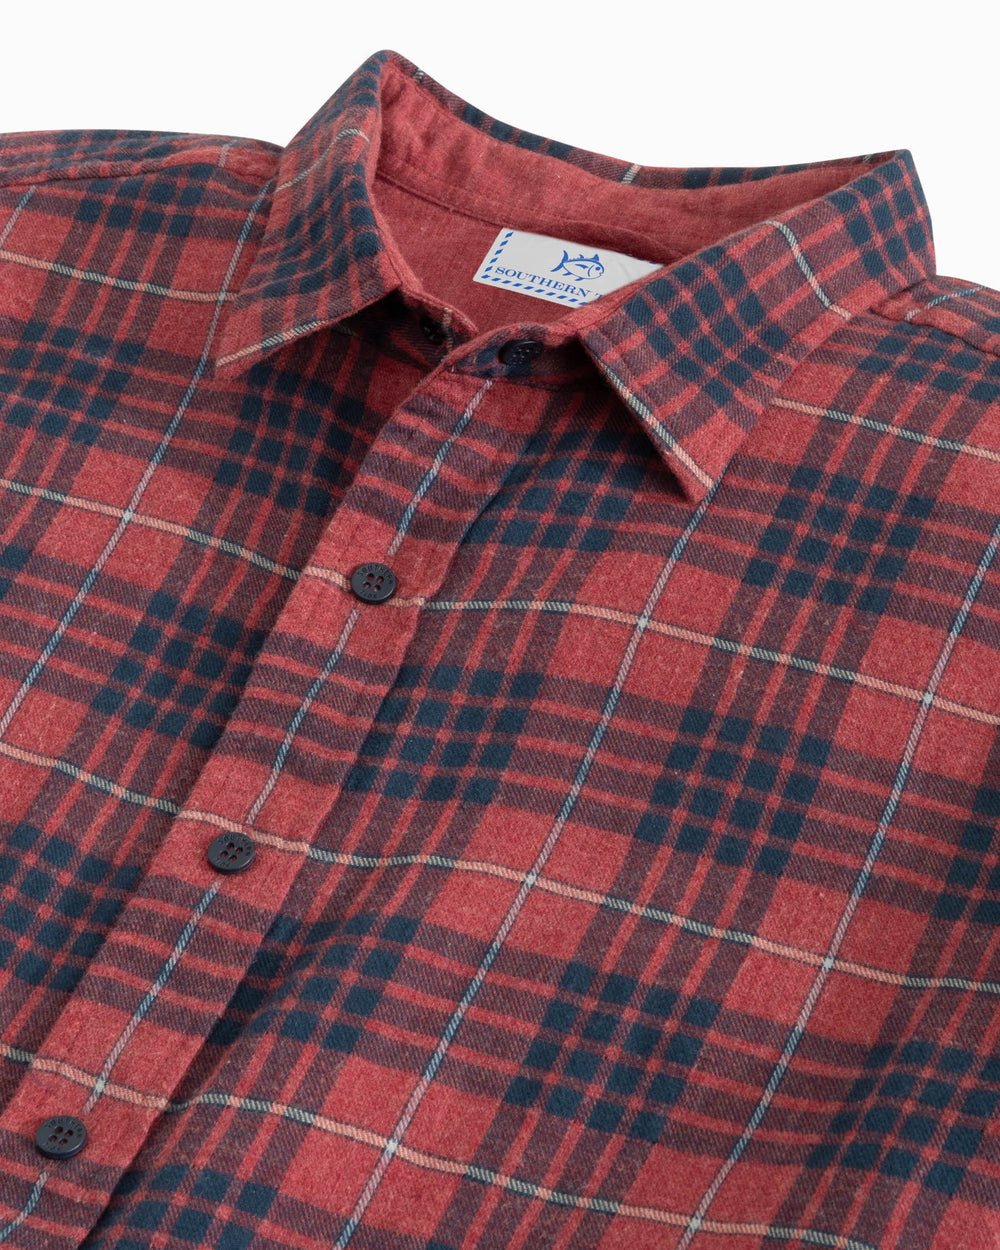 The detail view of the Southern Tide Payton Heather Reversible Plaid Sport Shirt by Southern Tide - Heather Tuscany Red